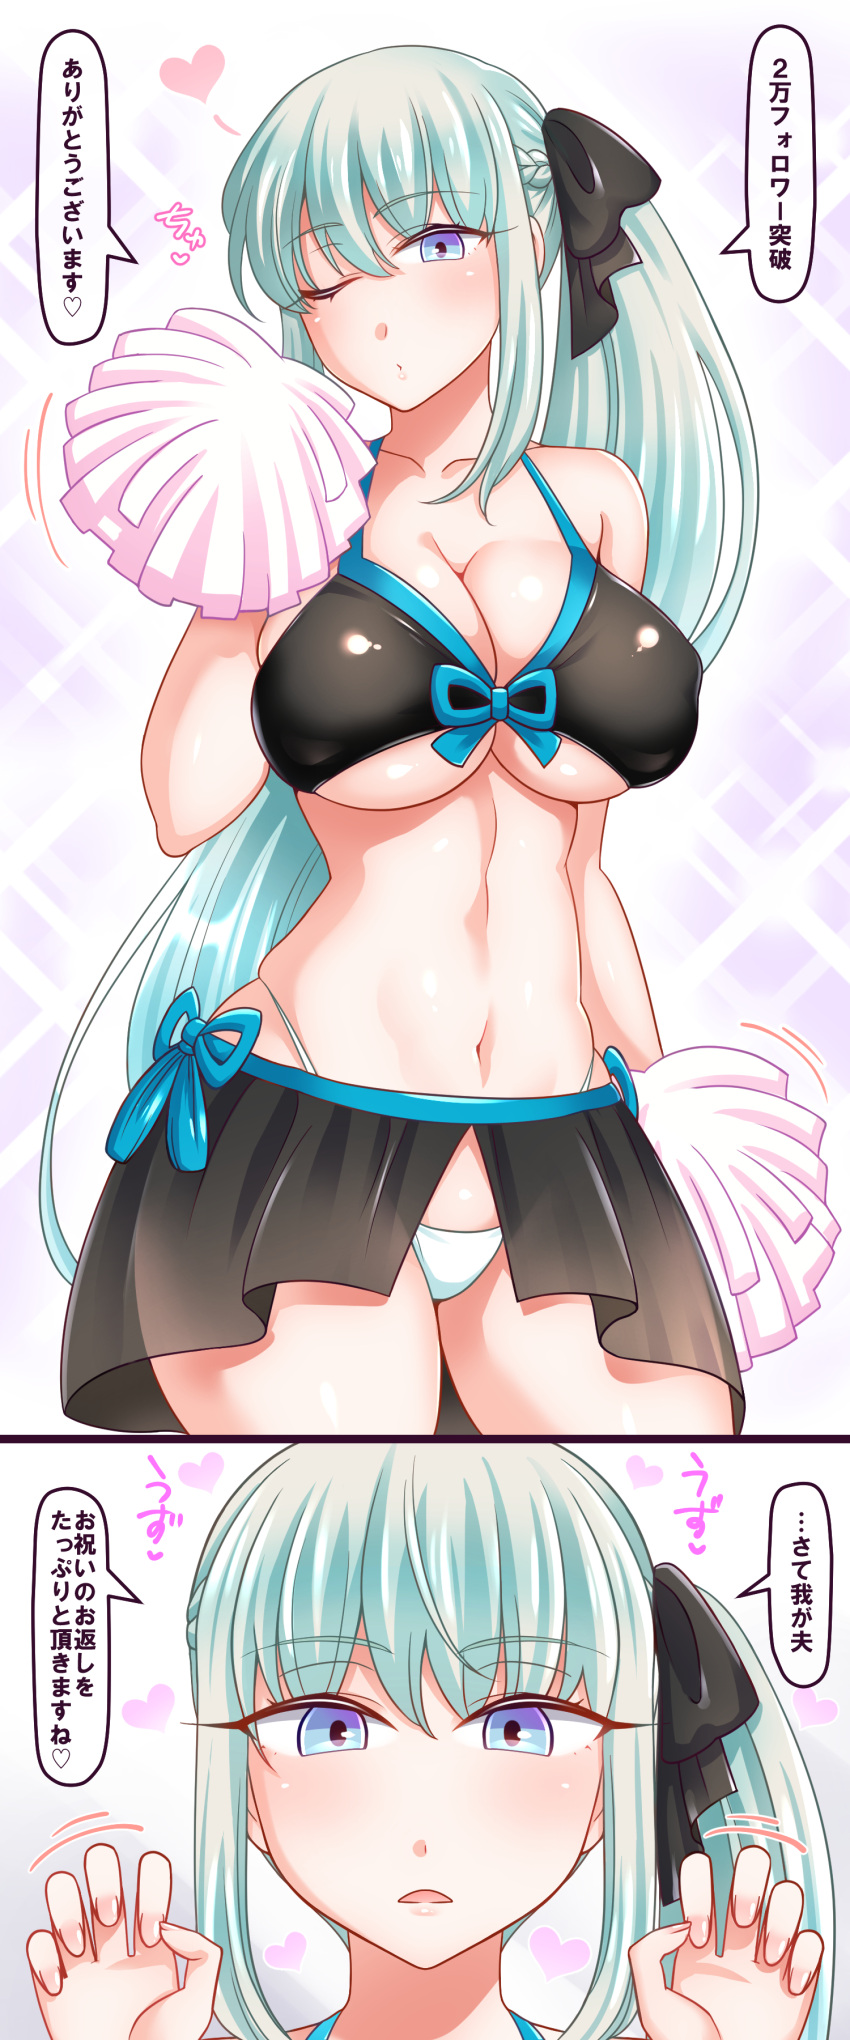 1girl absurdres black_bow bow braid breasts cheerleader crop_top crop_top_overhang fate/grand_order fate_(series) french_braid groping_motion highres holding holding_pom_poms large_breasts light_blue_eyes midriff miniskirt morgan_le_fay_(fate) navel one_eye_closed platinum_blonde_hair pom_pom_(cheerleading) skirt sleeveless smile solo yakisobapan_tarou_&amp;_negitoro-ko